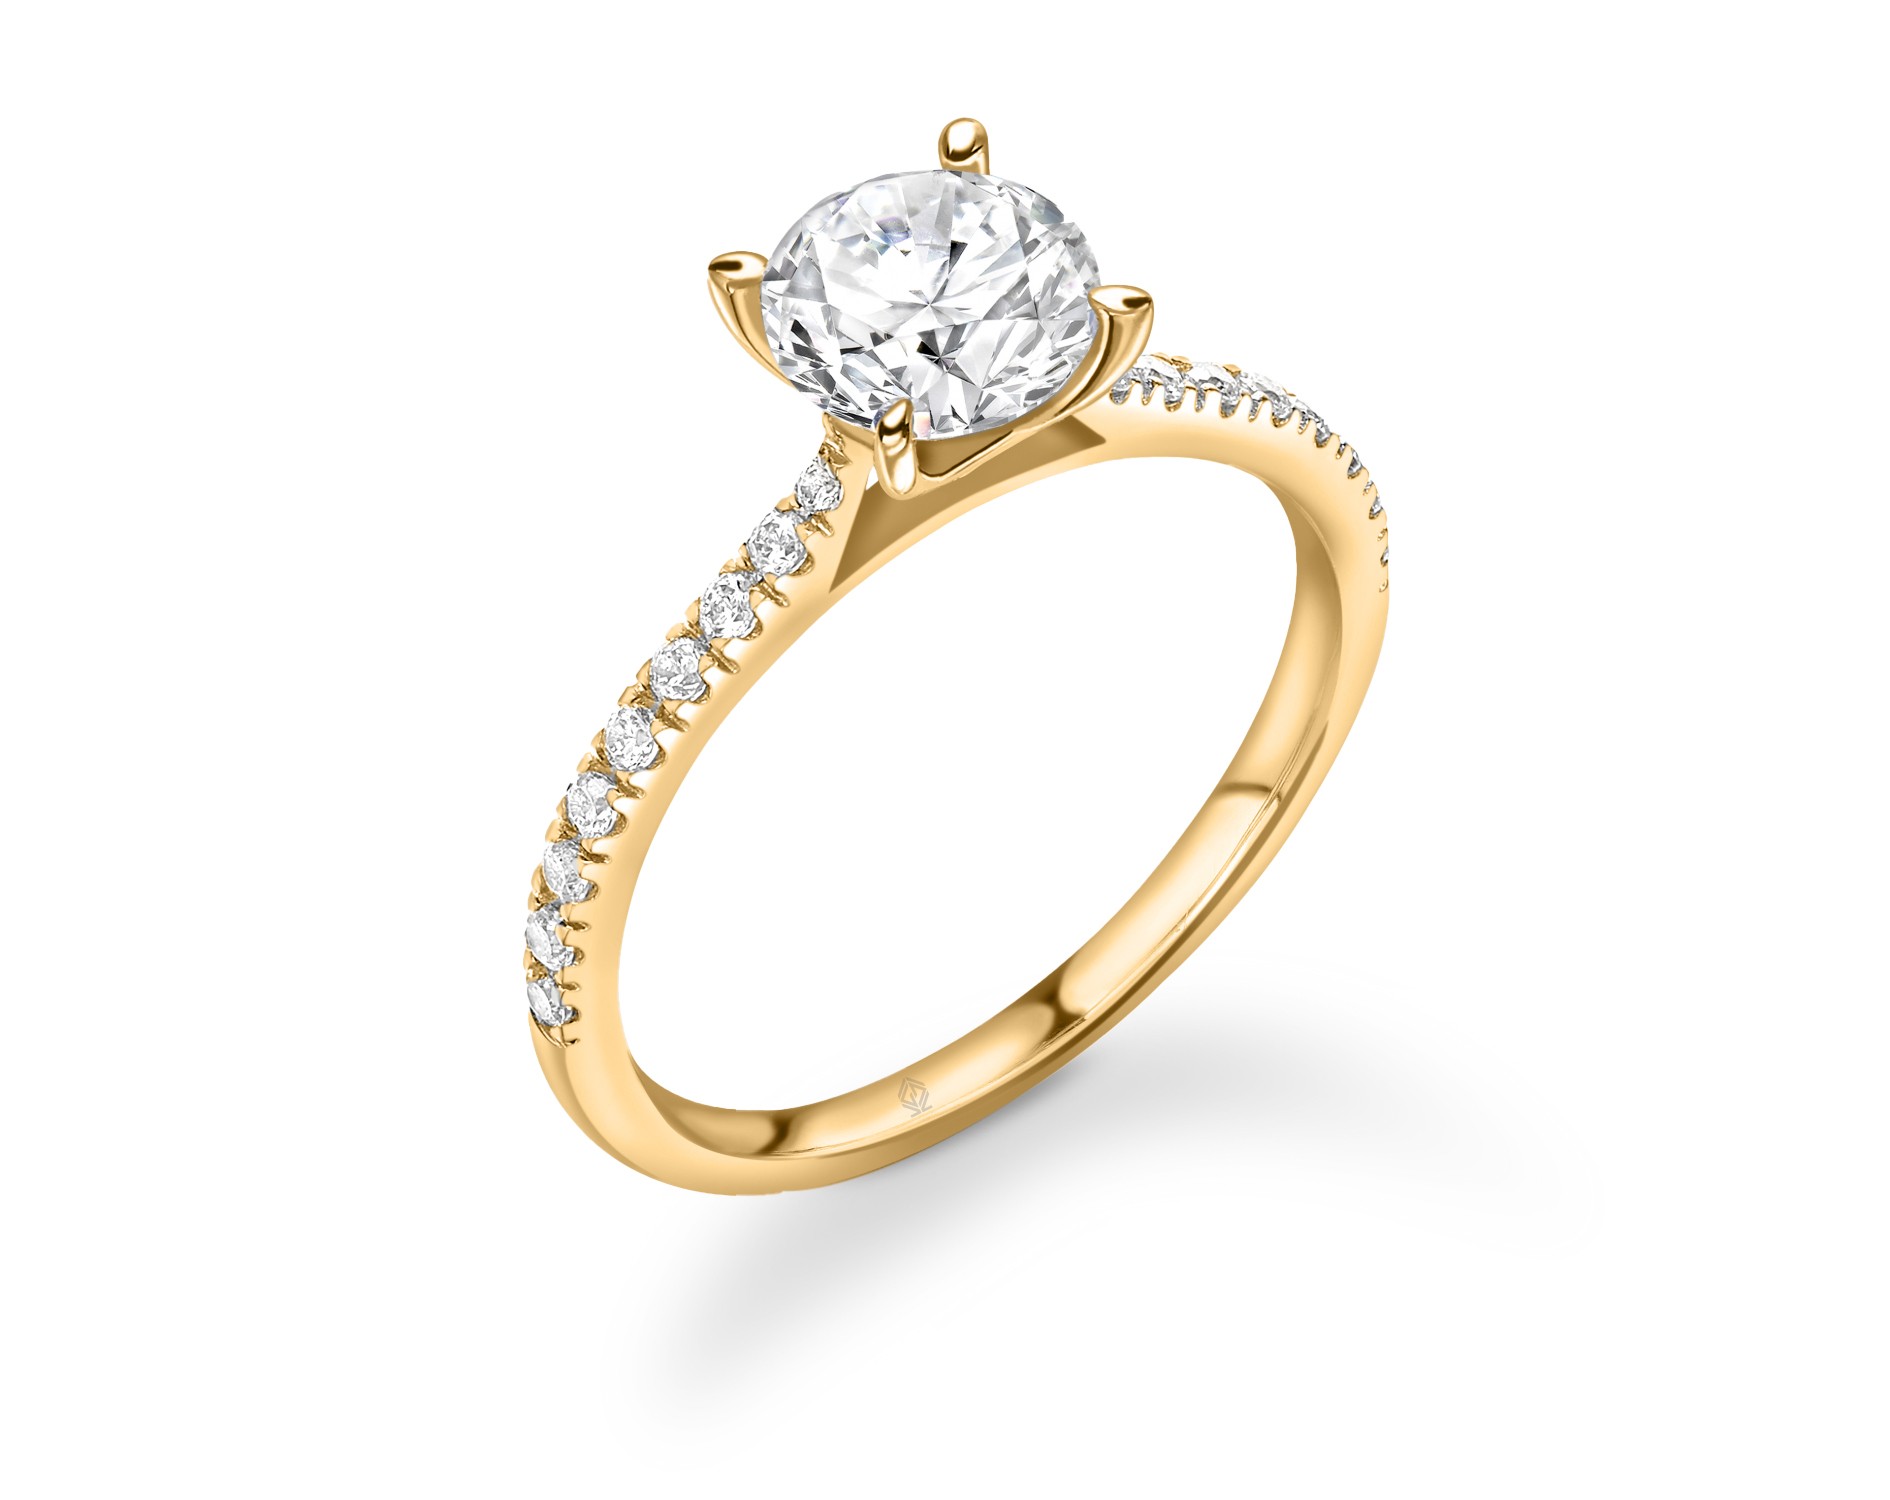 18K YELLOW GOLD ROUND CUT 4 PRONGS DIAMOND ENGAGEMENT RING WITH SIDE STONES PAVE SET